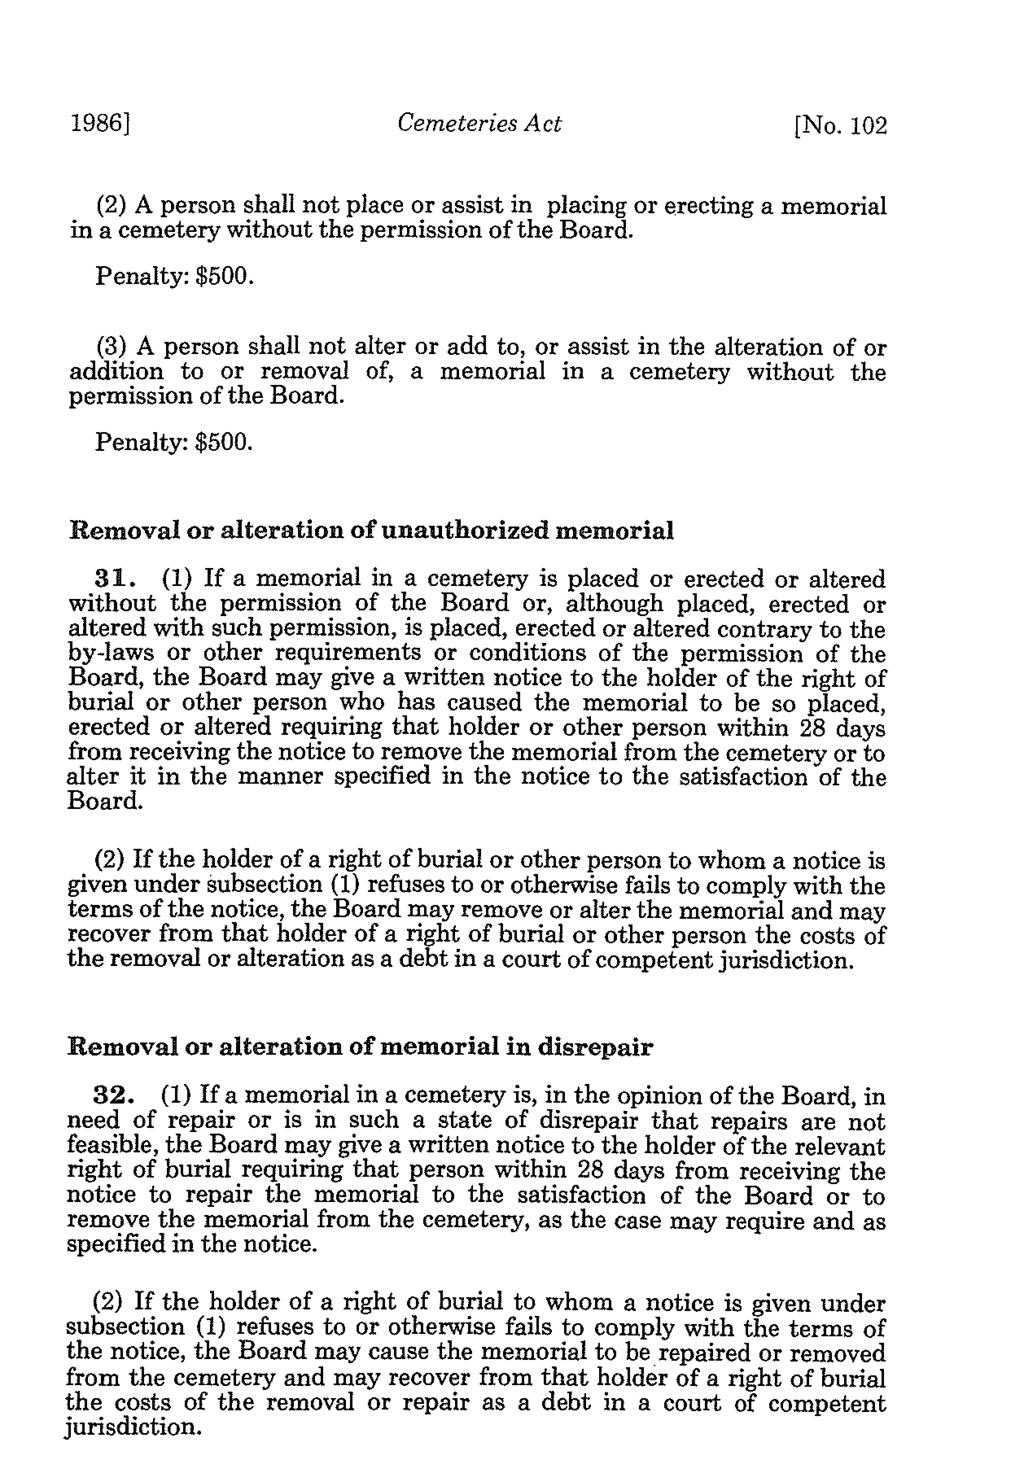 1986] Cemeteries Act [No. 102 (2) A person shall not place or assist in placing or erecting a memorial in a cemetery without the permission of the Board. Penalty: $500.